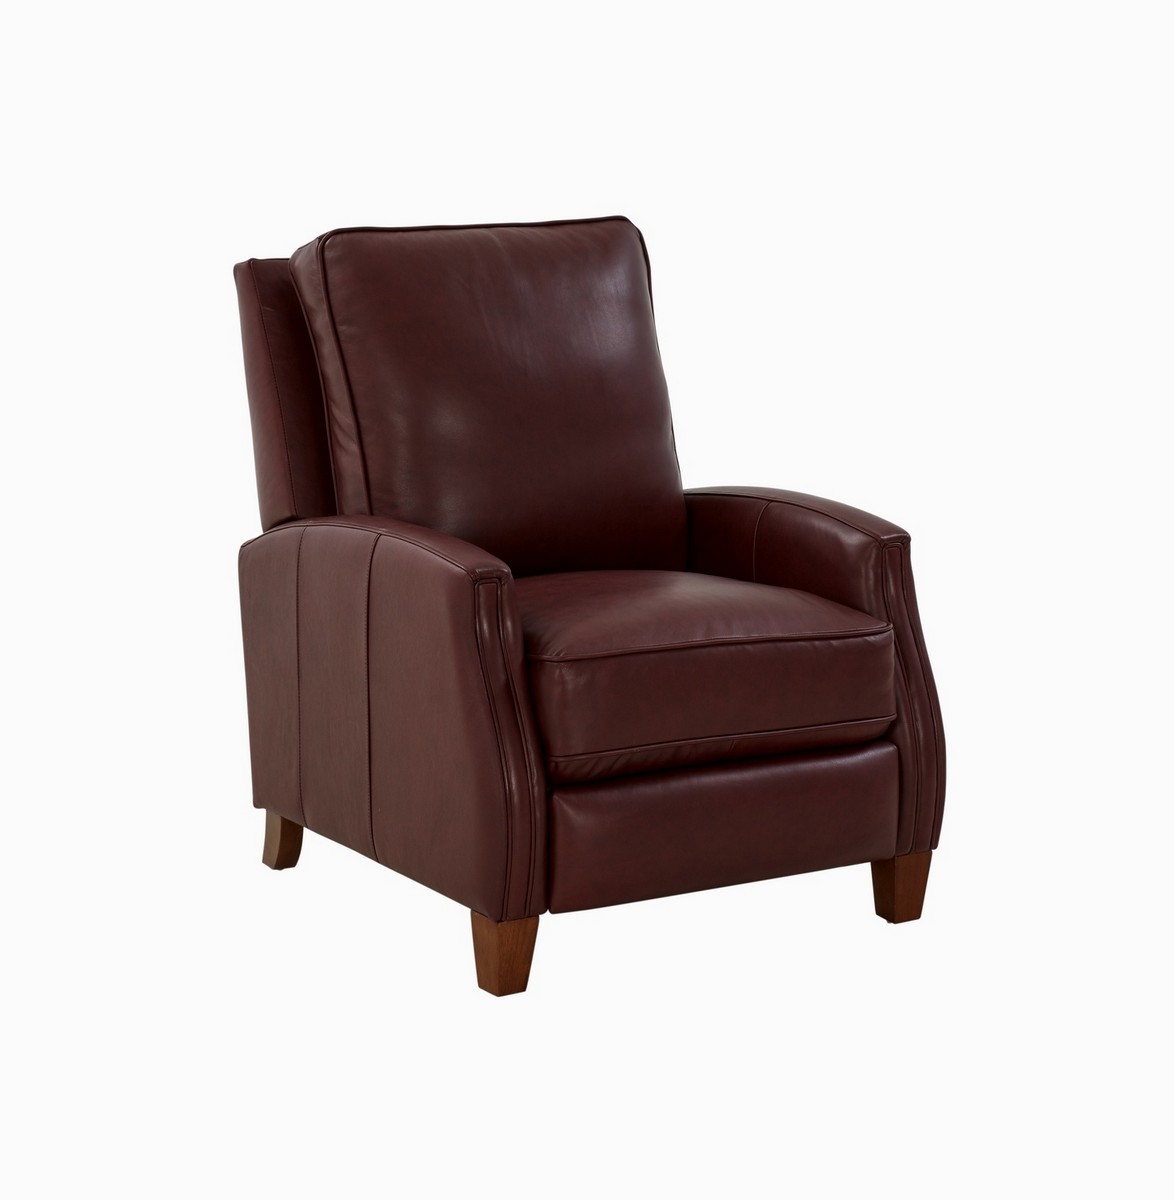 Barcalounger Penrose Recliner Chair - Shoreham Wine/All Leather